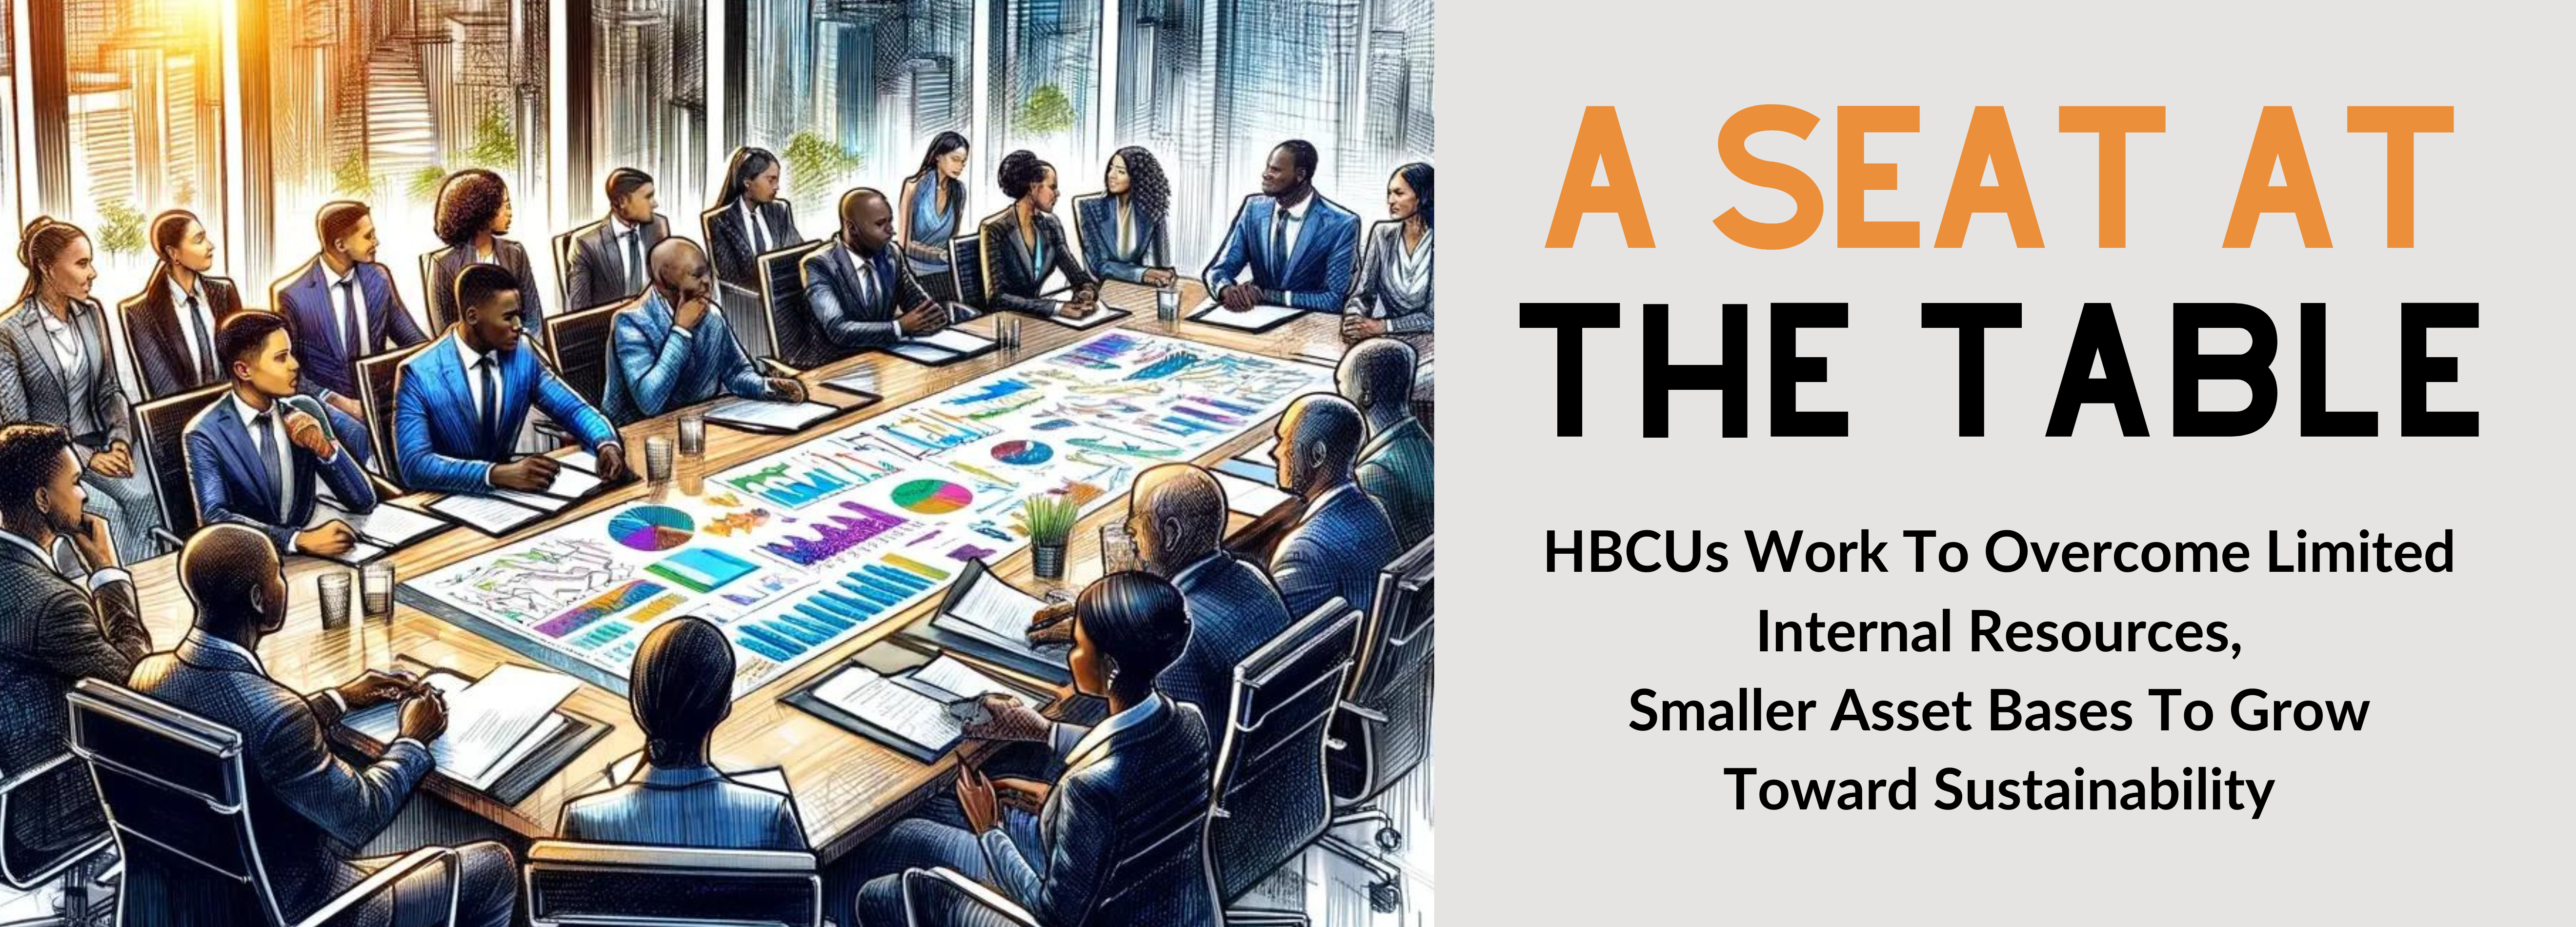 A Seat At The Table: HBCUs Work To Overcome Limited Internal Resources, Smaller Asset Bases To Grow Toward Sustainability